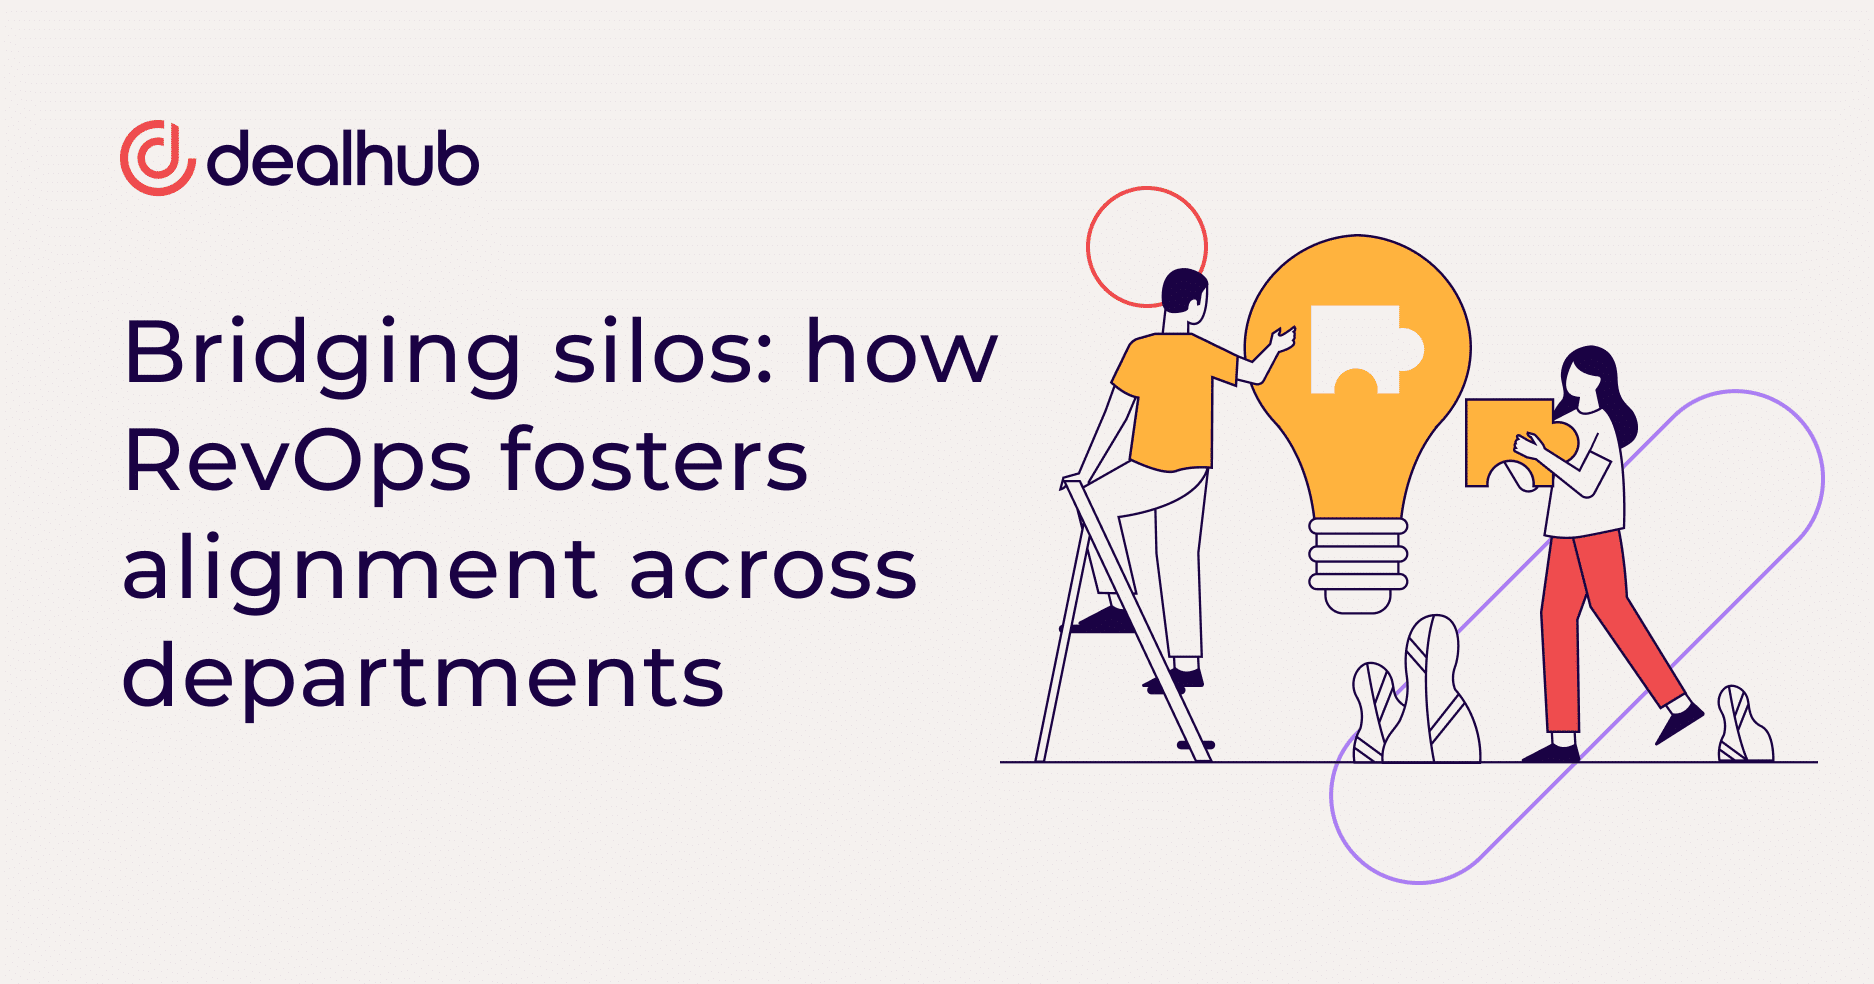 Bridging silos: How RevOps fosters alignment across departments